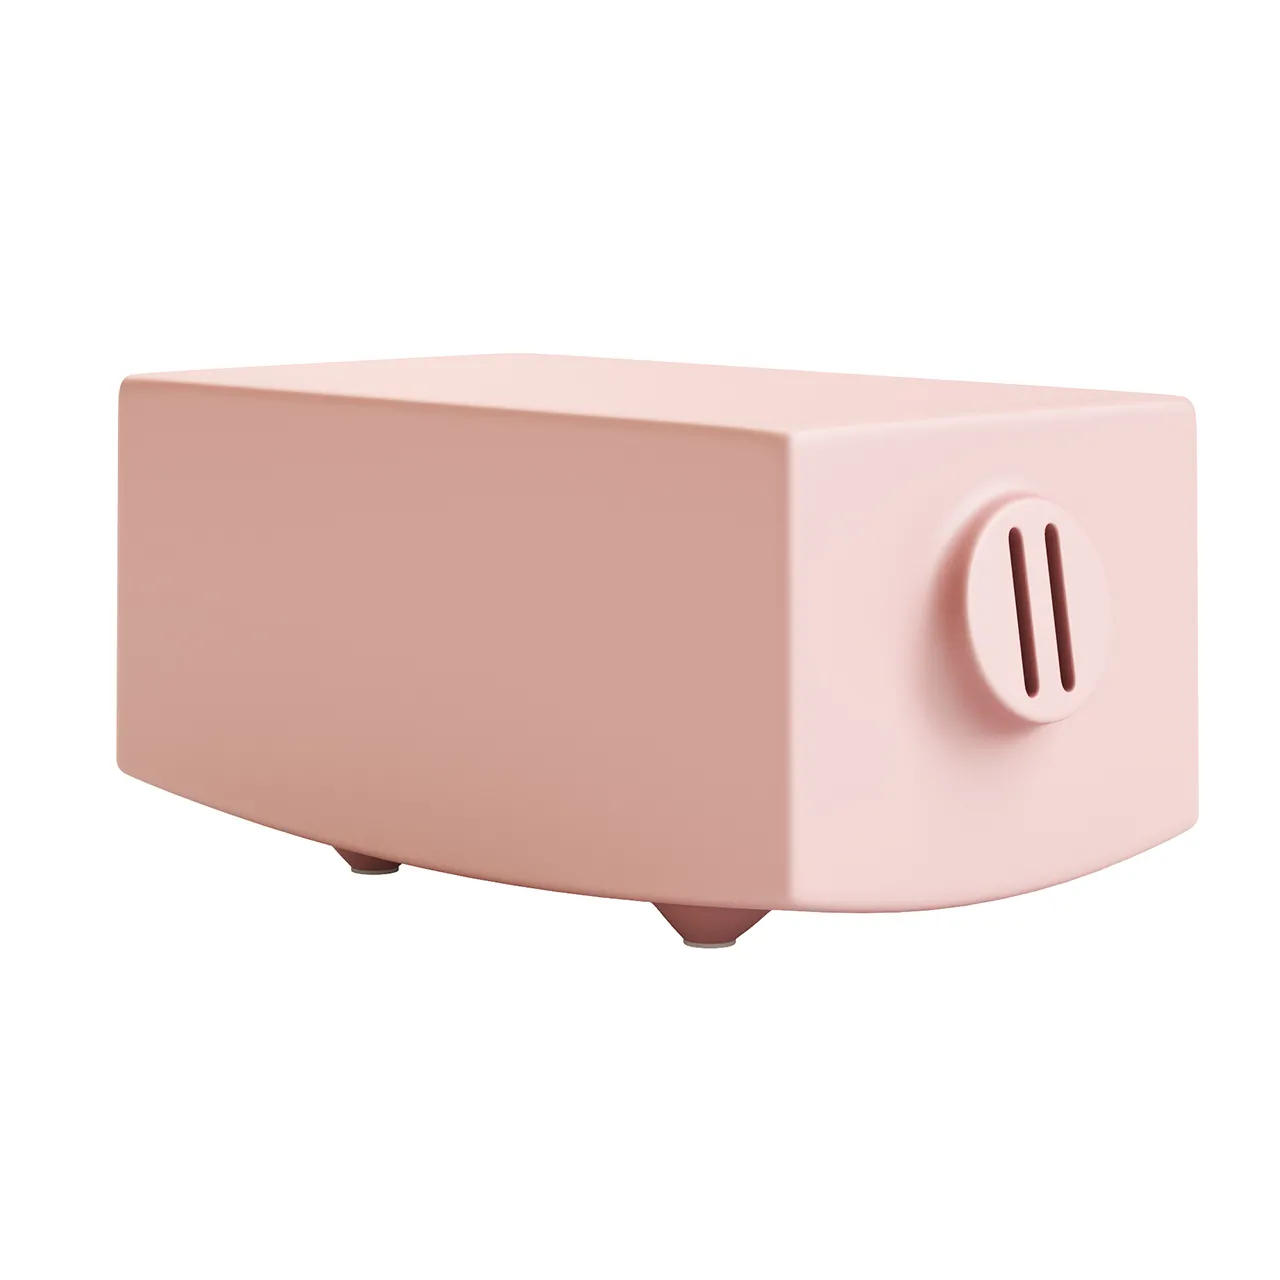 Accessories – teo-doro-piggy-bank-by-calligaris